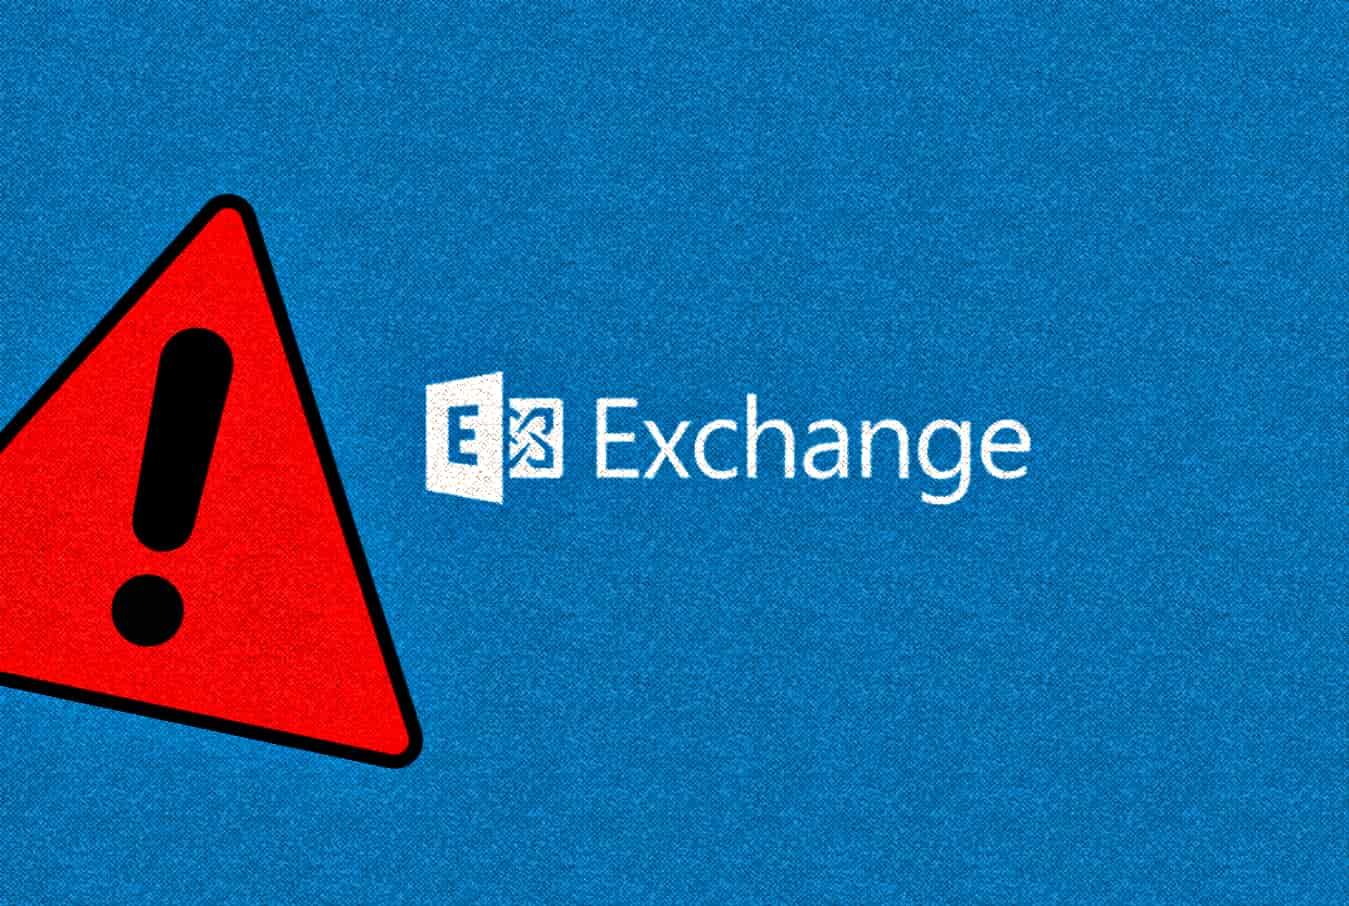 Hackers are exploiting critical vulnerability in Microsoft Exchange server